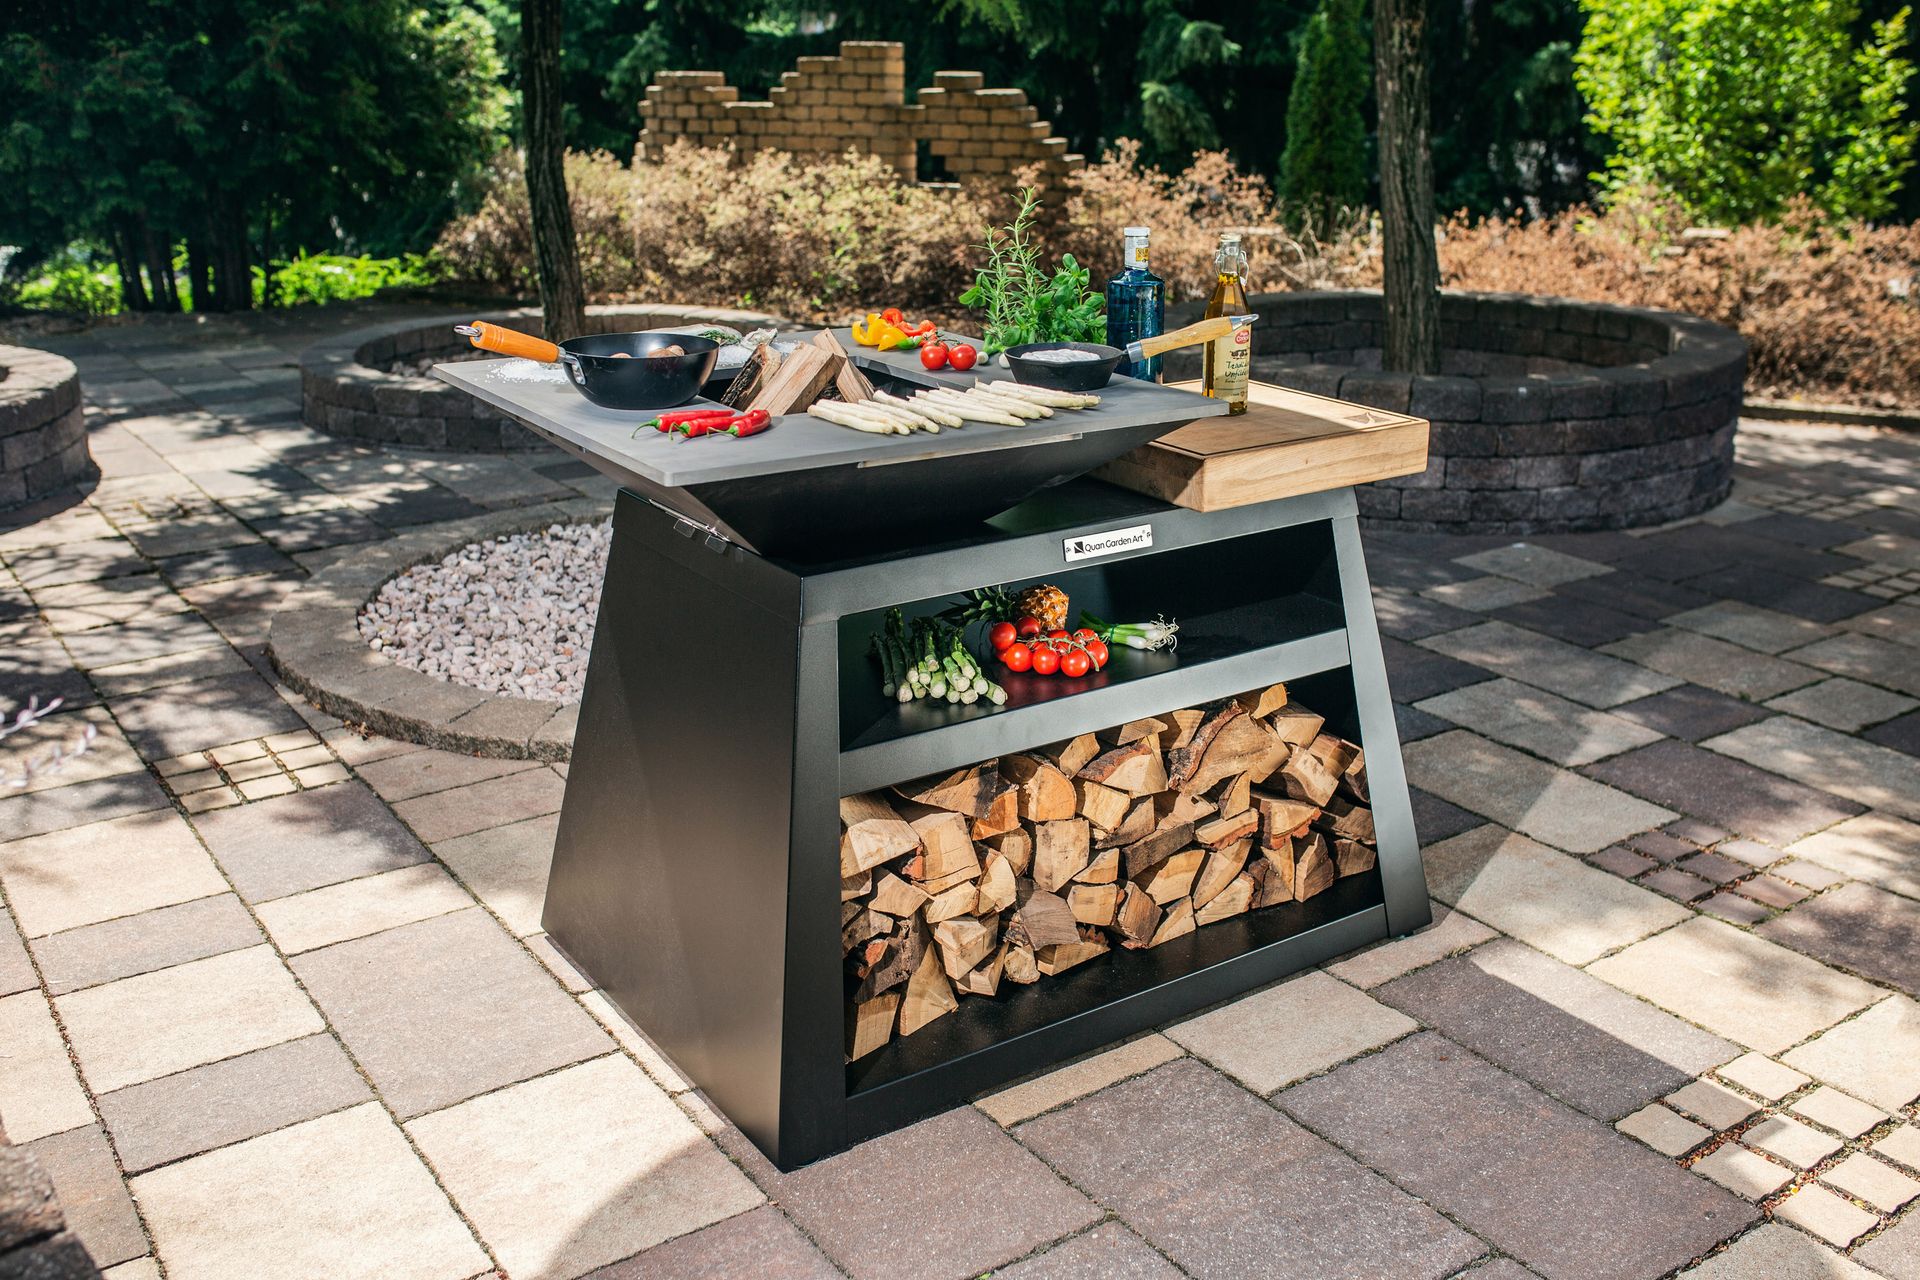 <p>                     If you're feeding a crowd, BBQs will make easy work of it. This style shown here has a large fire pit at the center and a tempered steel top plate for fast cooking Teppanyaki style food. And, it has a side table for easy prepping and a storage shelf below for barbecue tools and marinades, so you can keep everything you need on hand.                   </p>                                      <p>                     Another plus is that less smoke is produced as the base has been designed to direct airflow. Keep the fire stoked once the barbecue's over and everyone can keep partying till late.                   </p>